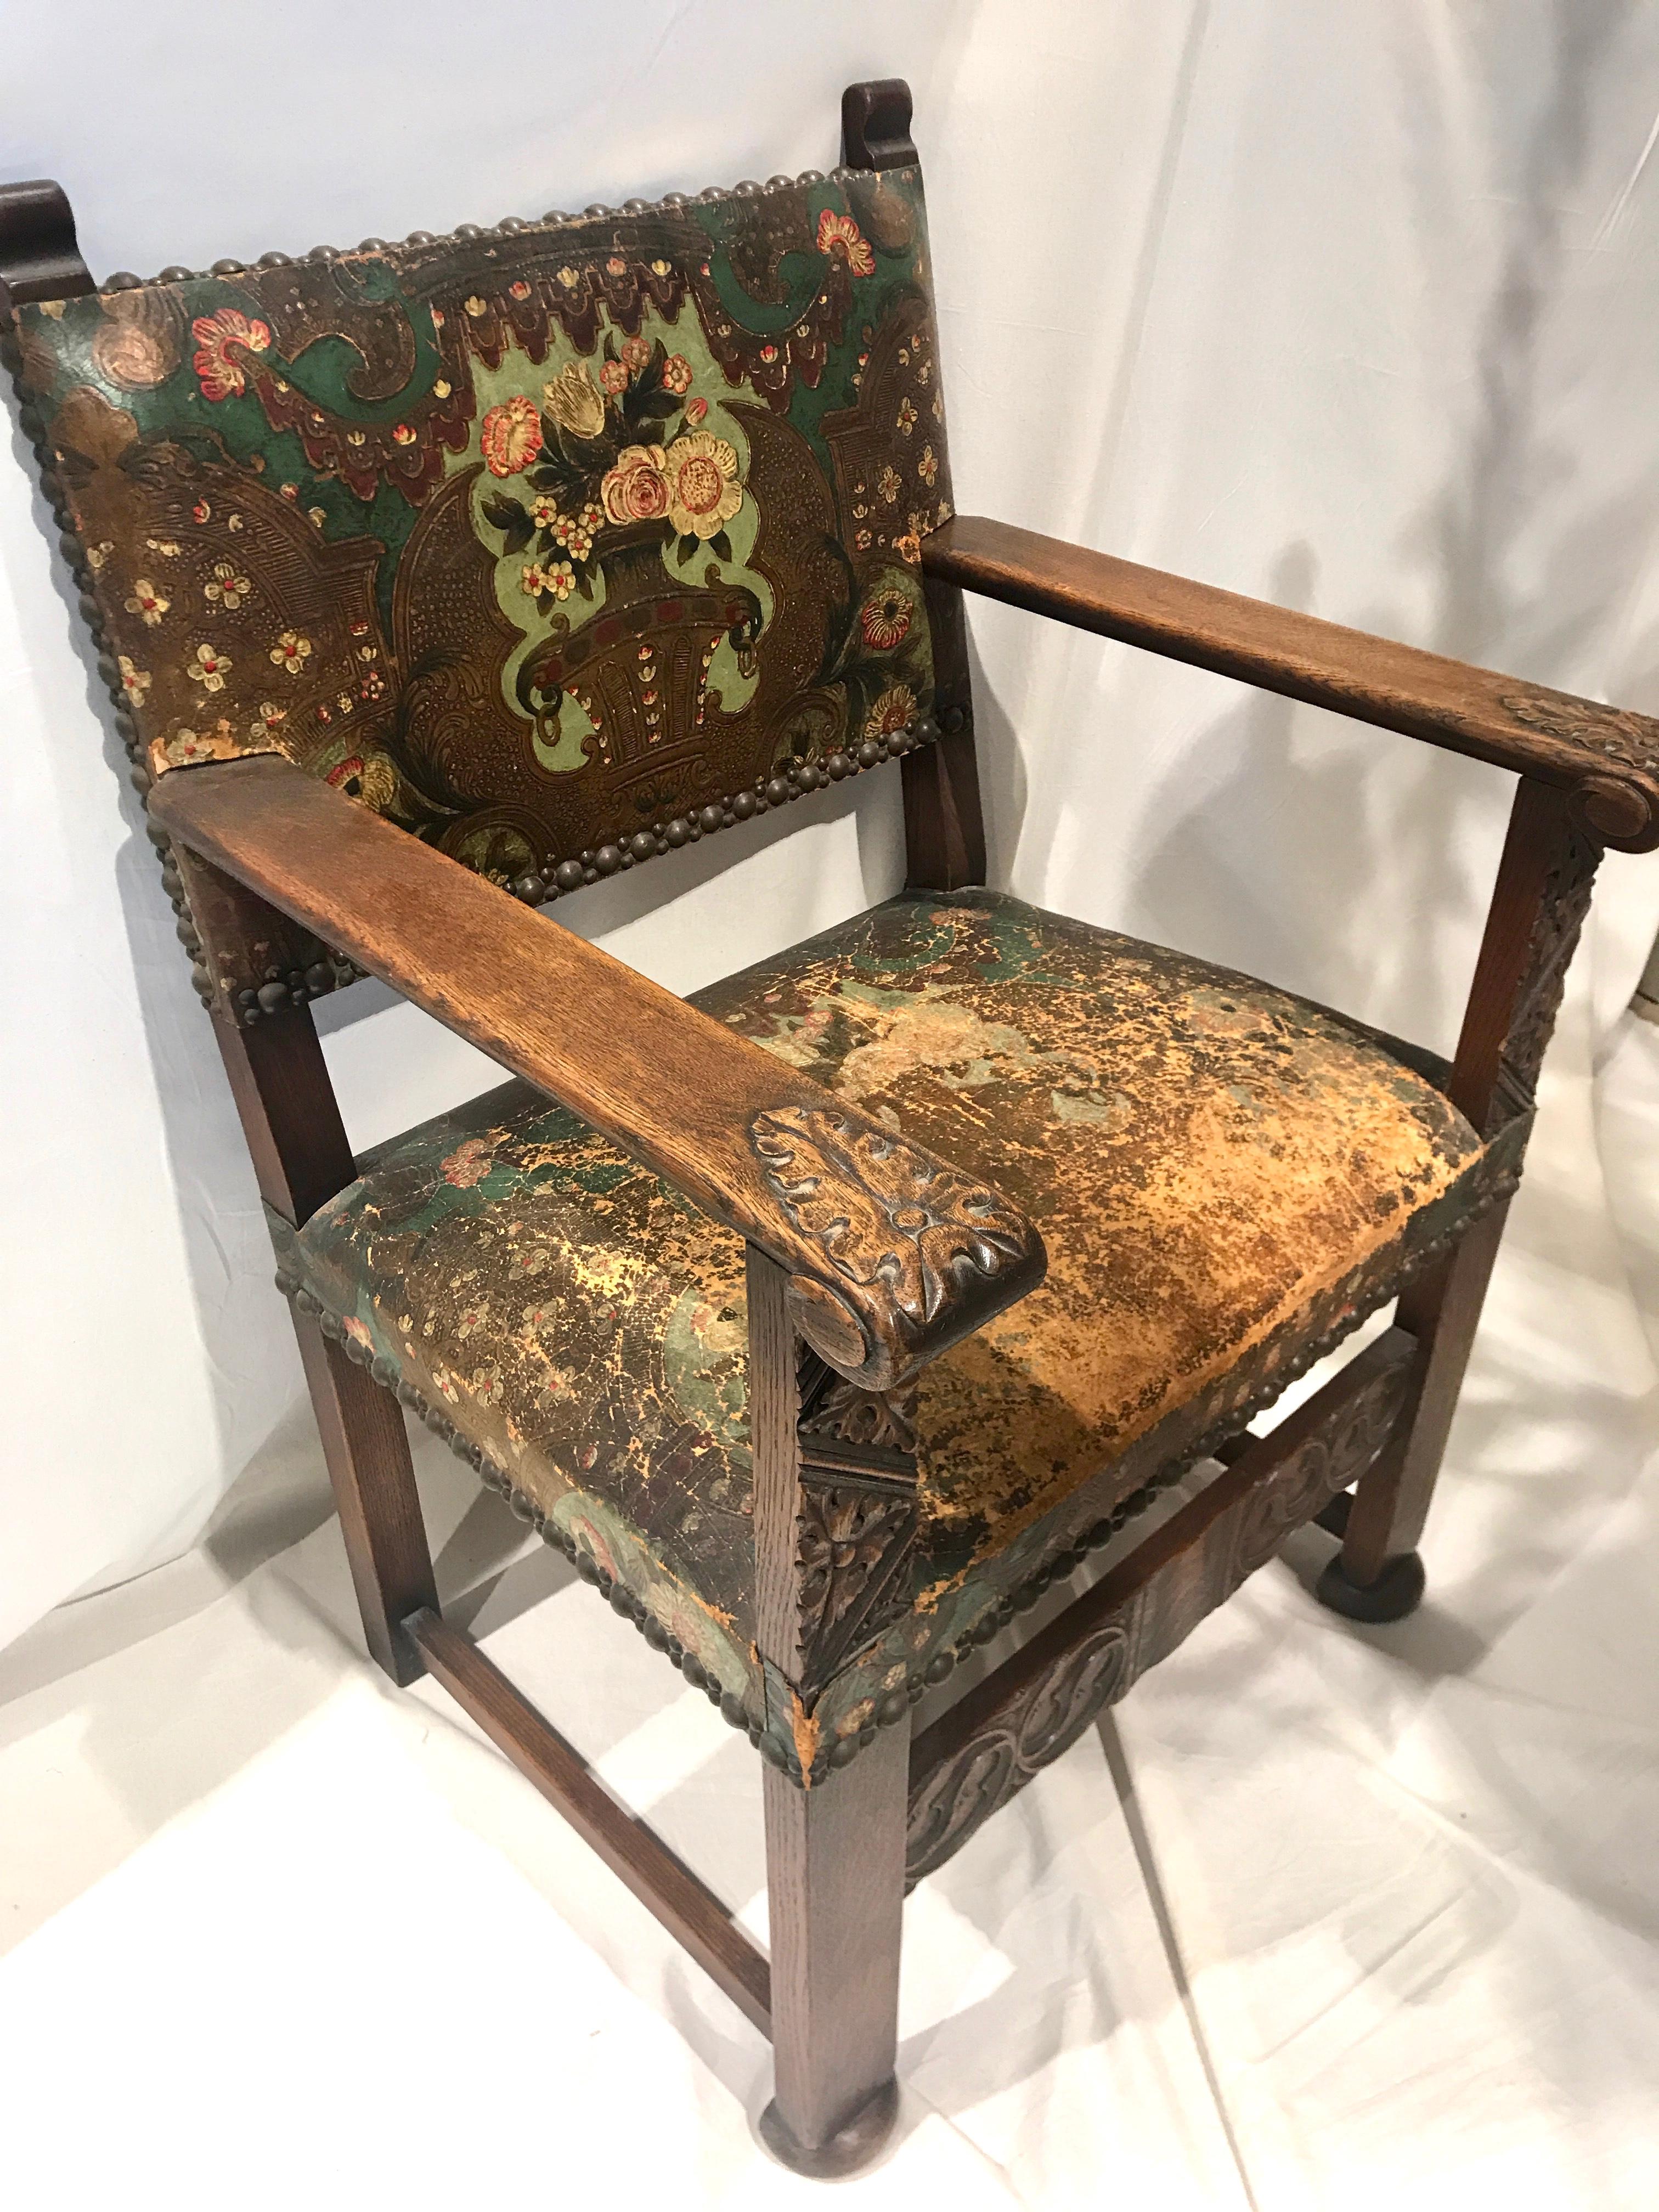 19th century Flemish oak armchair retaining the original hand embossed and painted Mechelen leather upholstery. The leather is painted in lovely shades of gold and turquoise on an embossed design of a floral vase and tasseled swag curtains. The